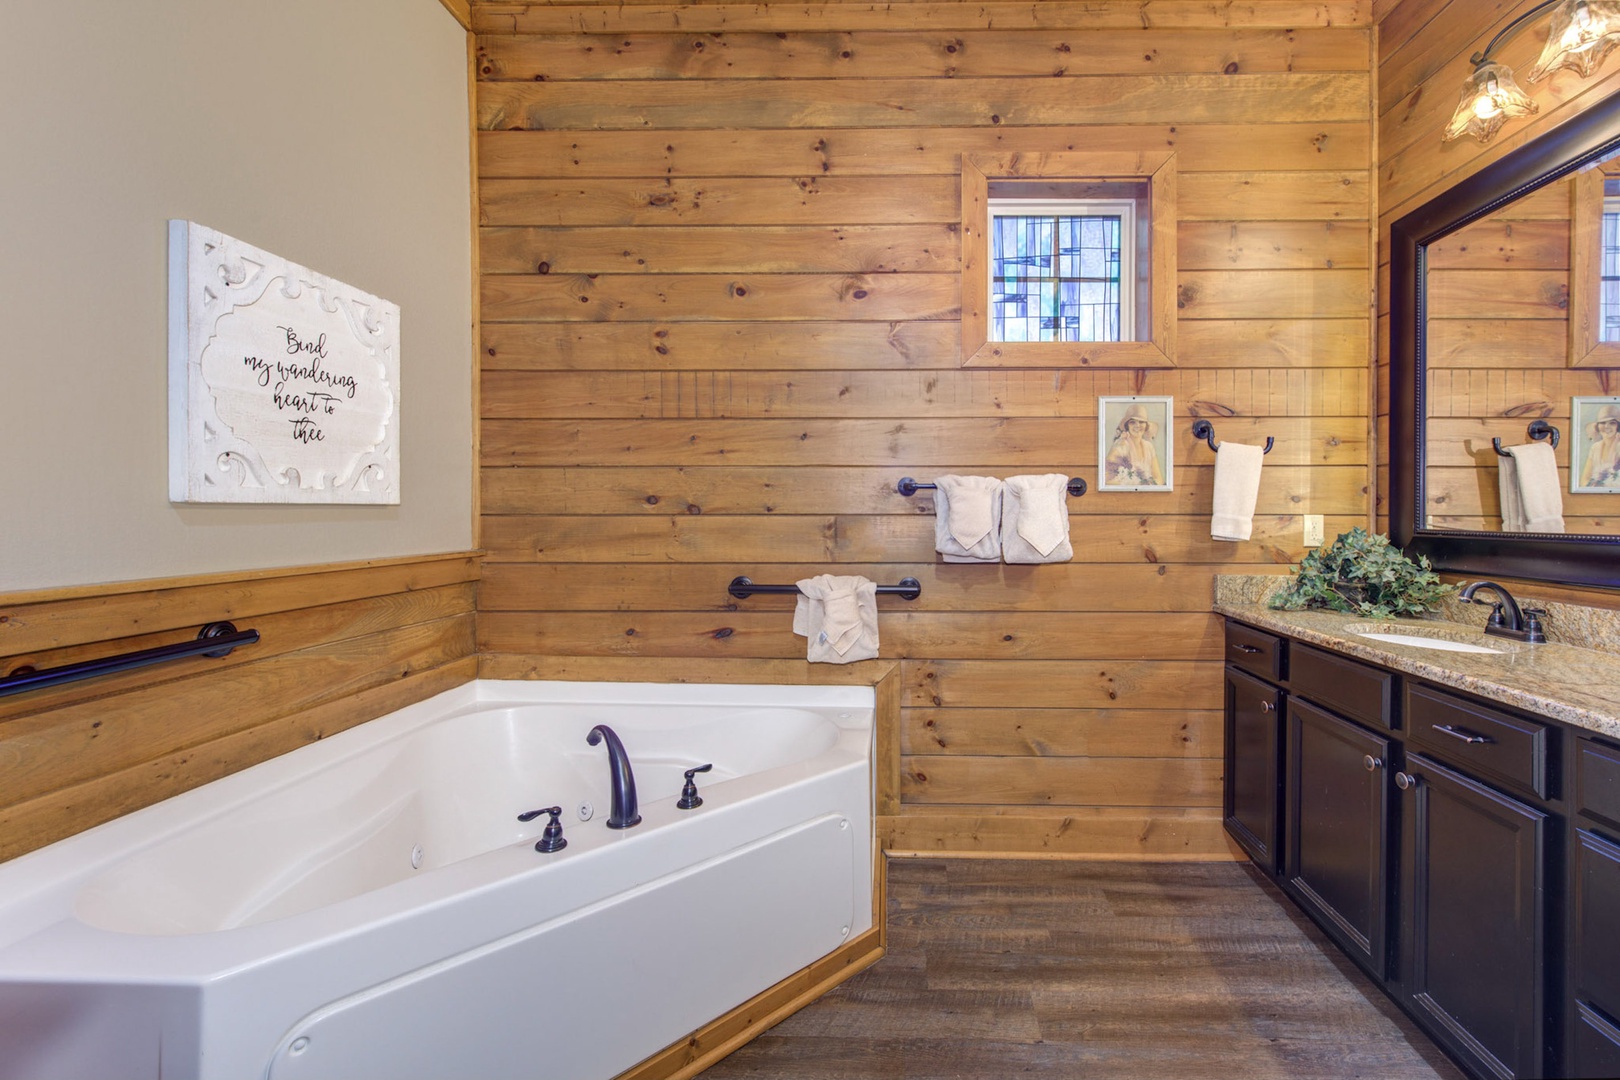 This ensuite offers a large vanity, walk-in shower, & luxurious soaking tub